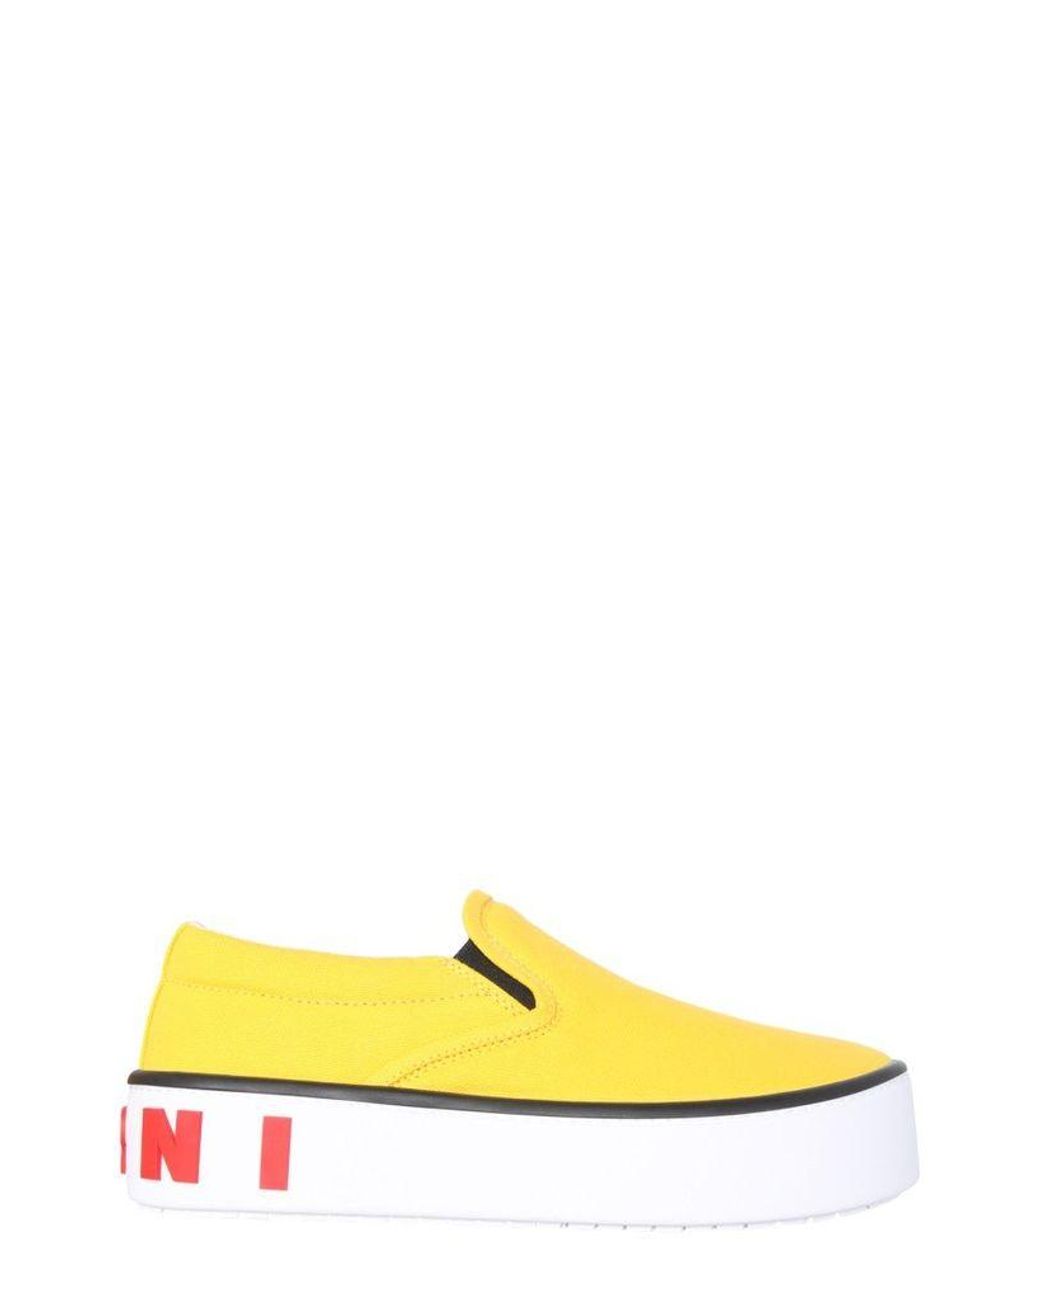 Marni Snzw010703p357100y18 Other Materials Sneakers in Yellow - Lyst